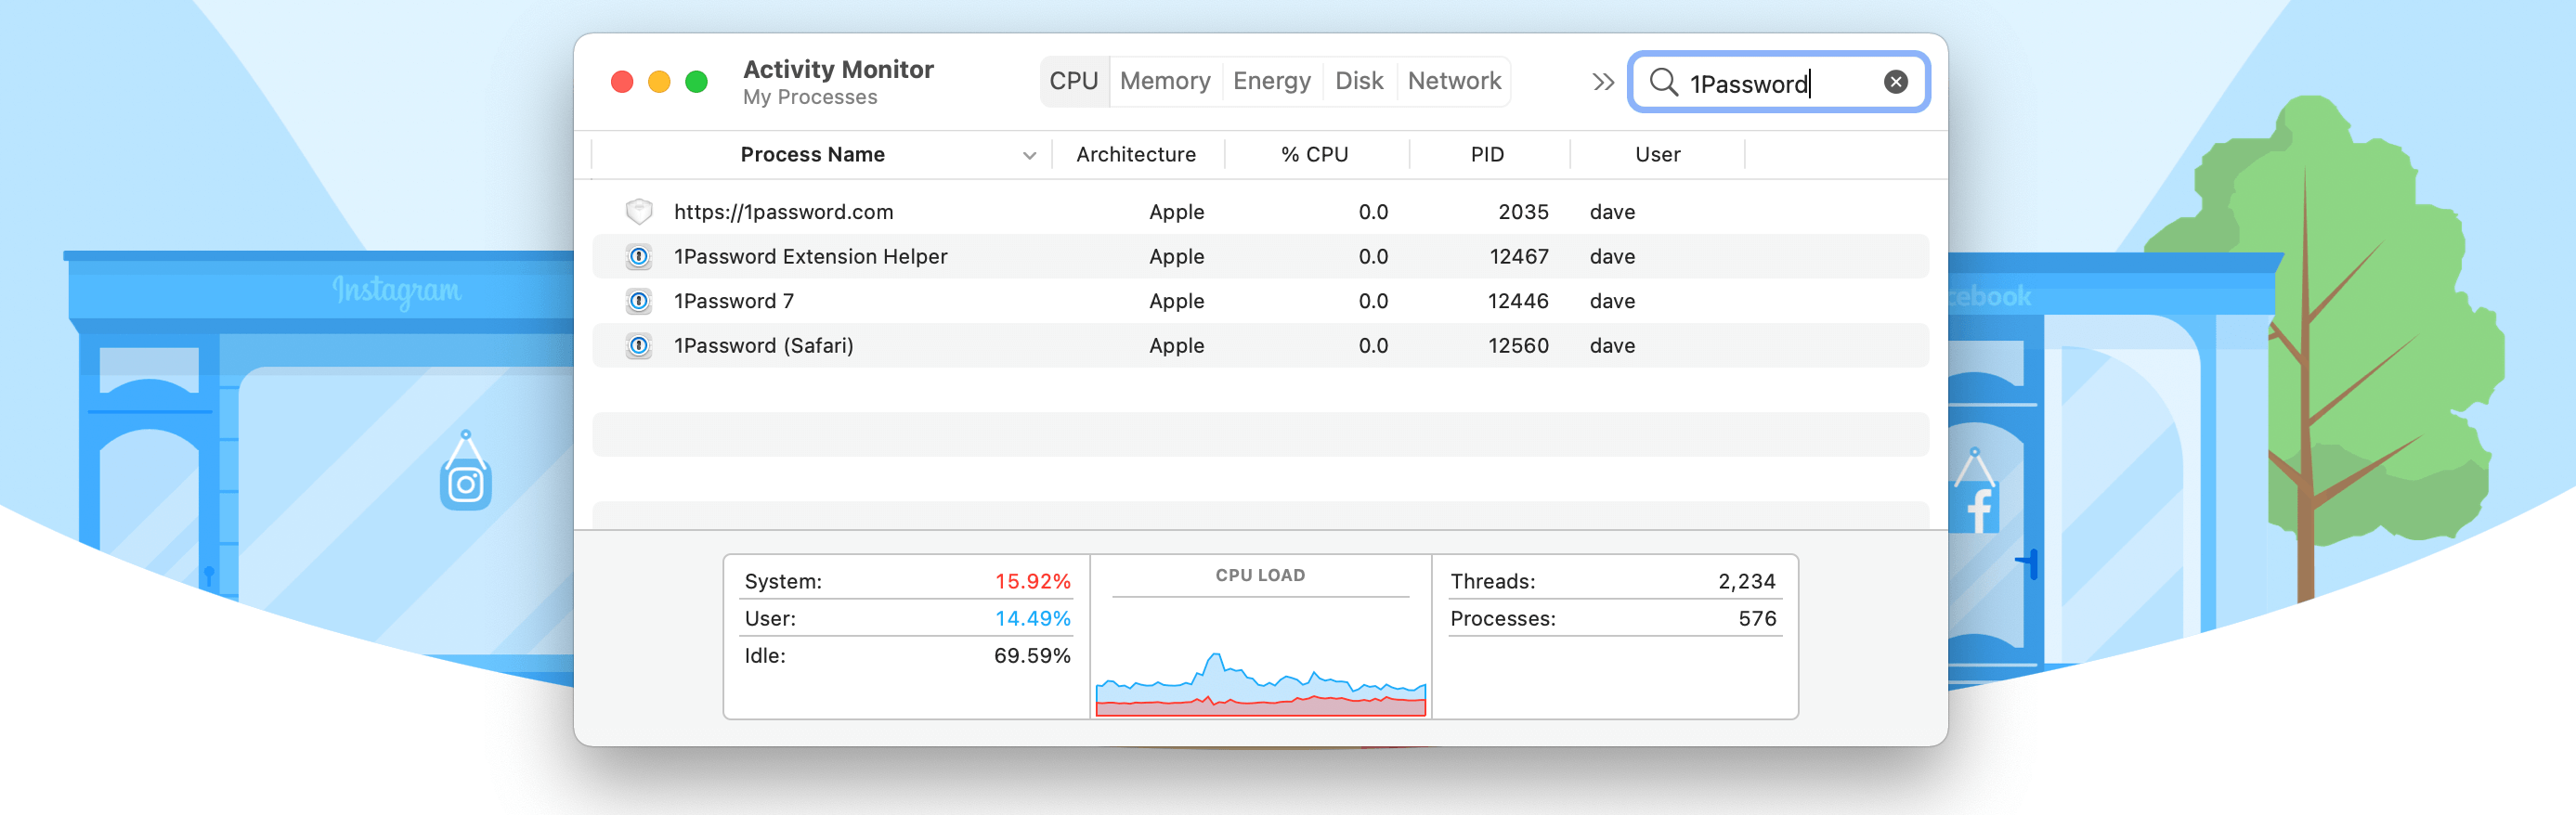 Activity Monitor showing 1Password processes running with Apple architecture instead of Intel